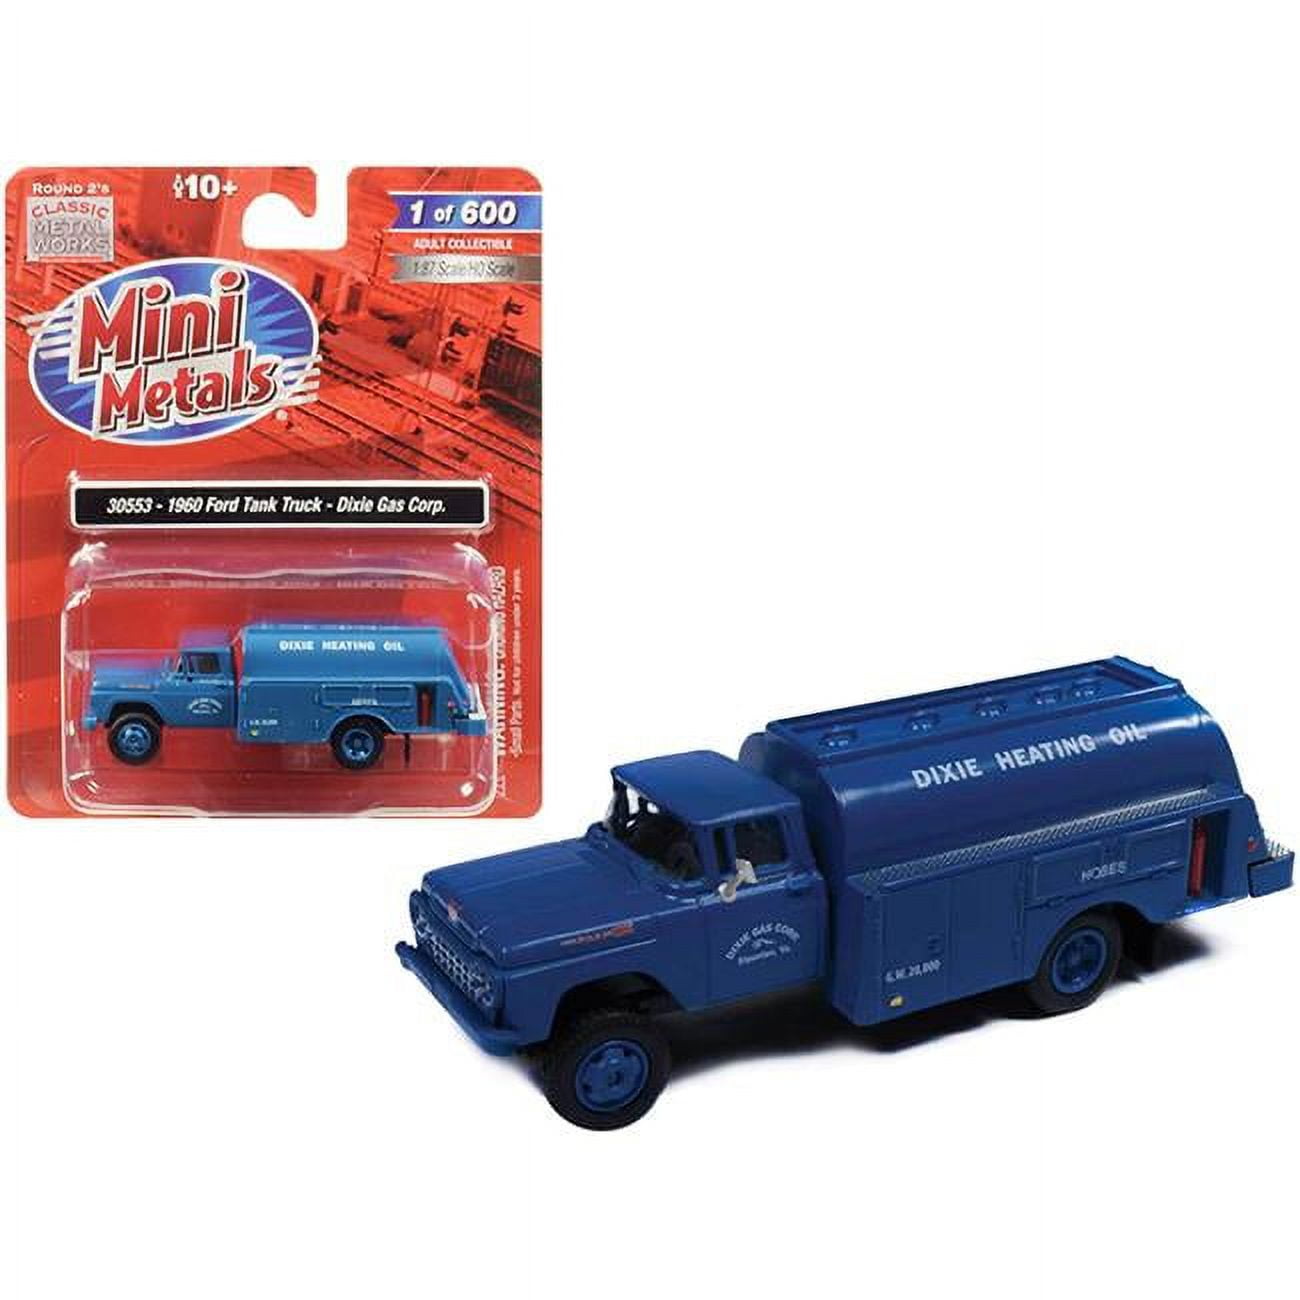 30553 1960 Ford Tank Truck Dixie Gas Corp. Blue 1-87 Ho Scale Model